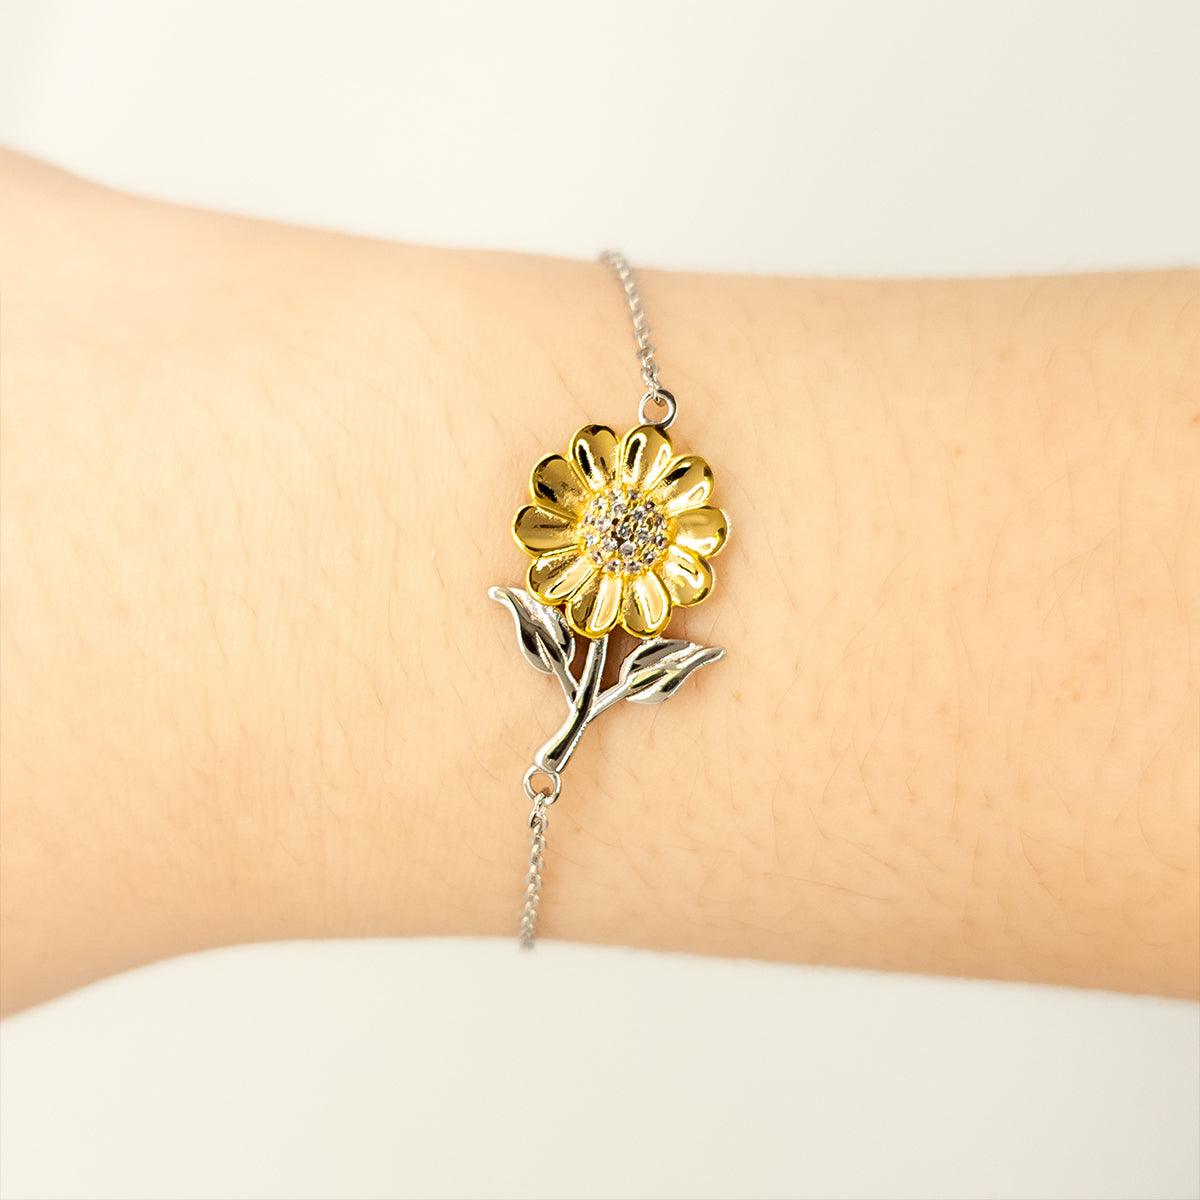 Sarcastic Welder Sunflower Bracelet Gifts, Christmas Holiday Gifts for Welder Birthday Message Card, Welder: Because greatness is woven into the fabric of every day, Coworkers, Friends - Mallard Moon Gift Shop